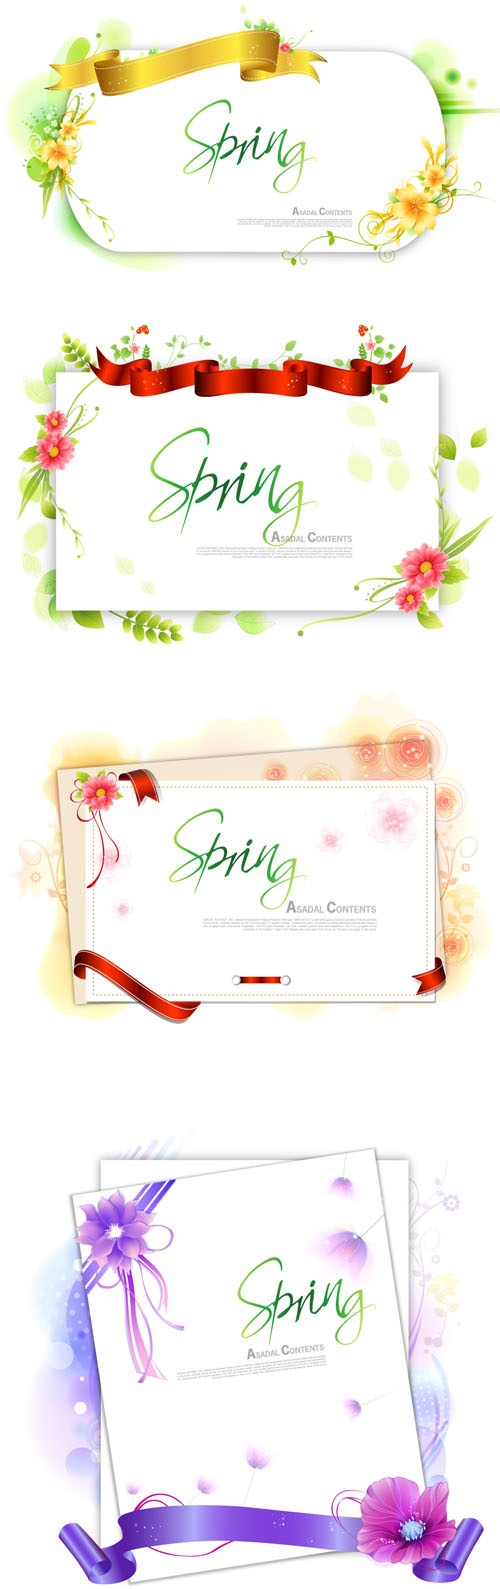 Flower frames with ribbons